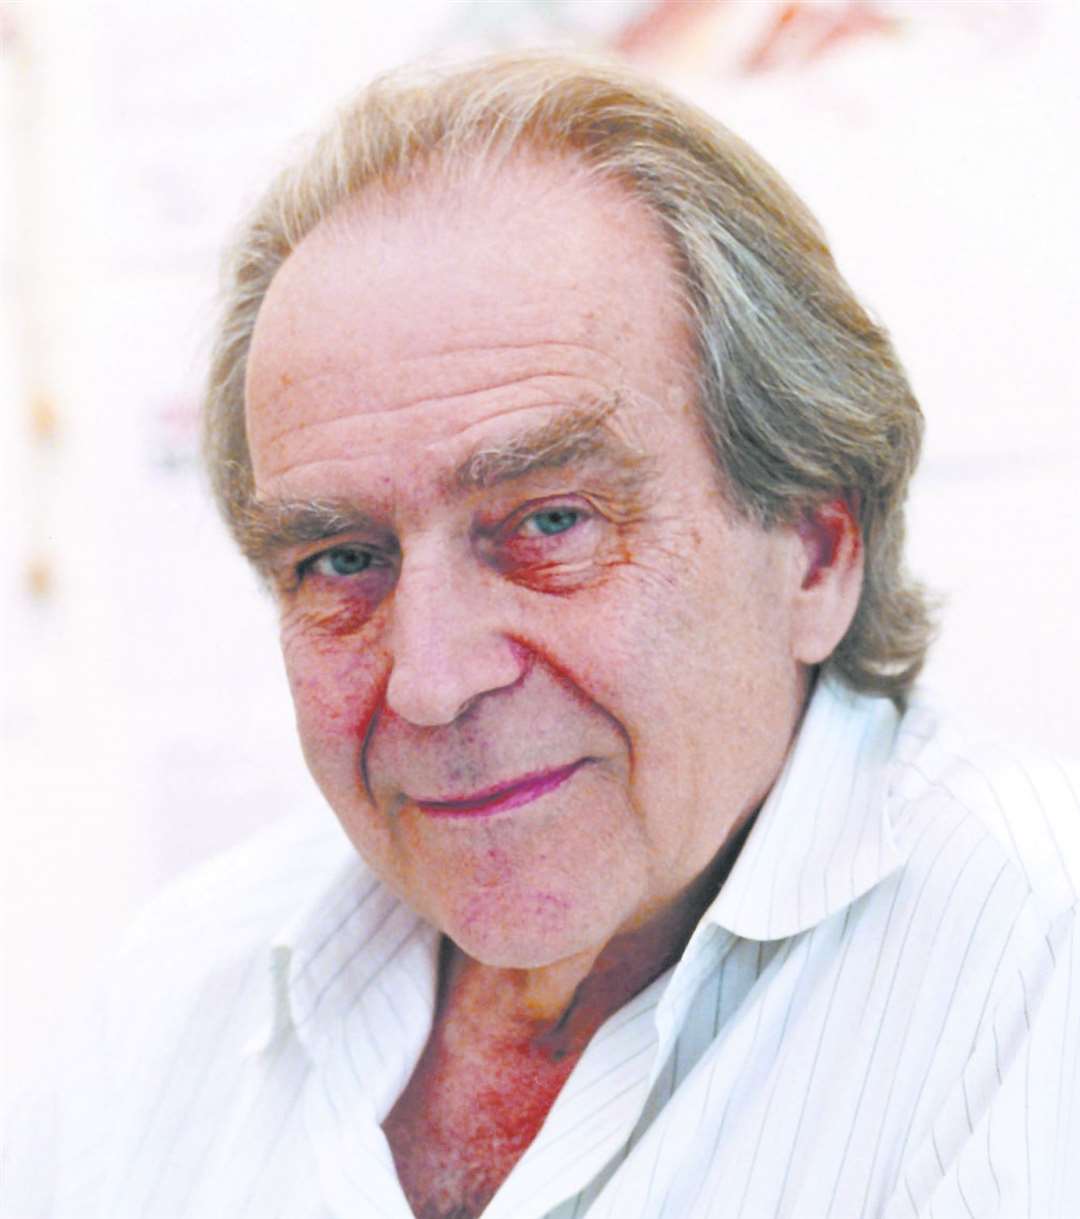 Political cartoonist Gerald Scarfe's work will be on show in Canterbury